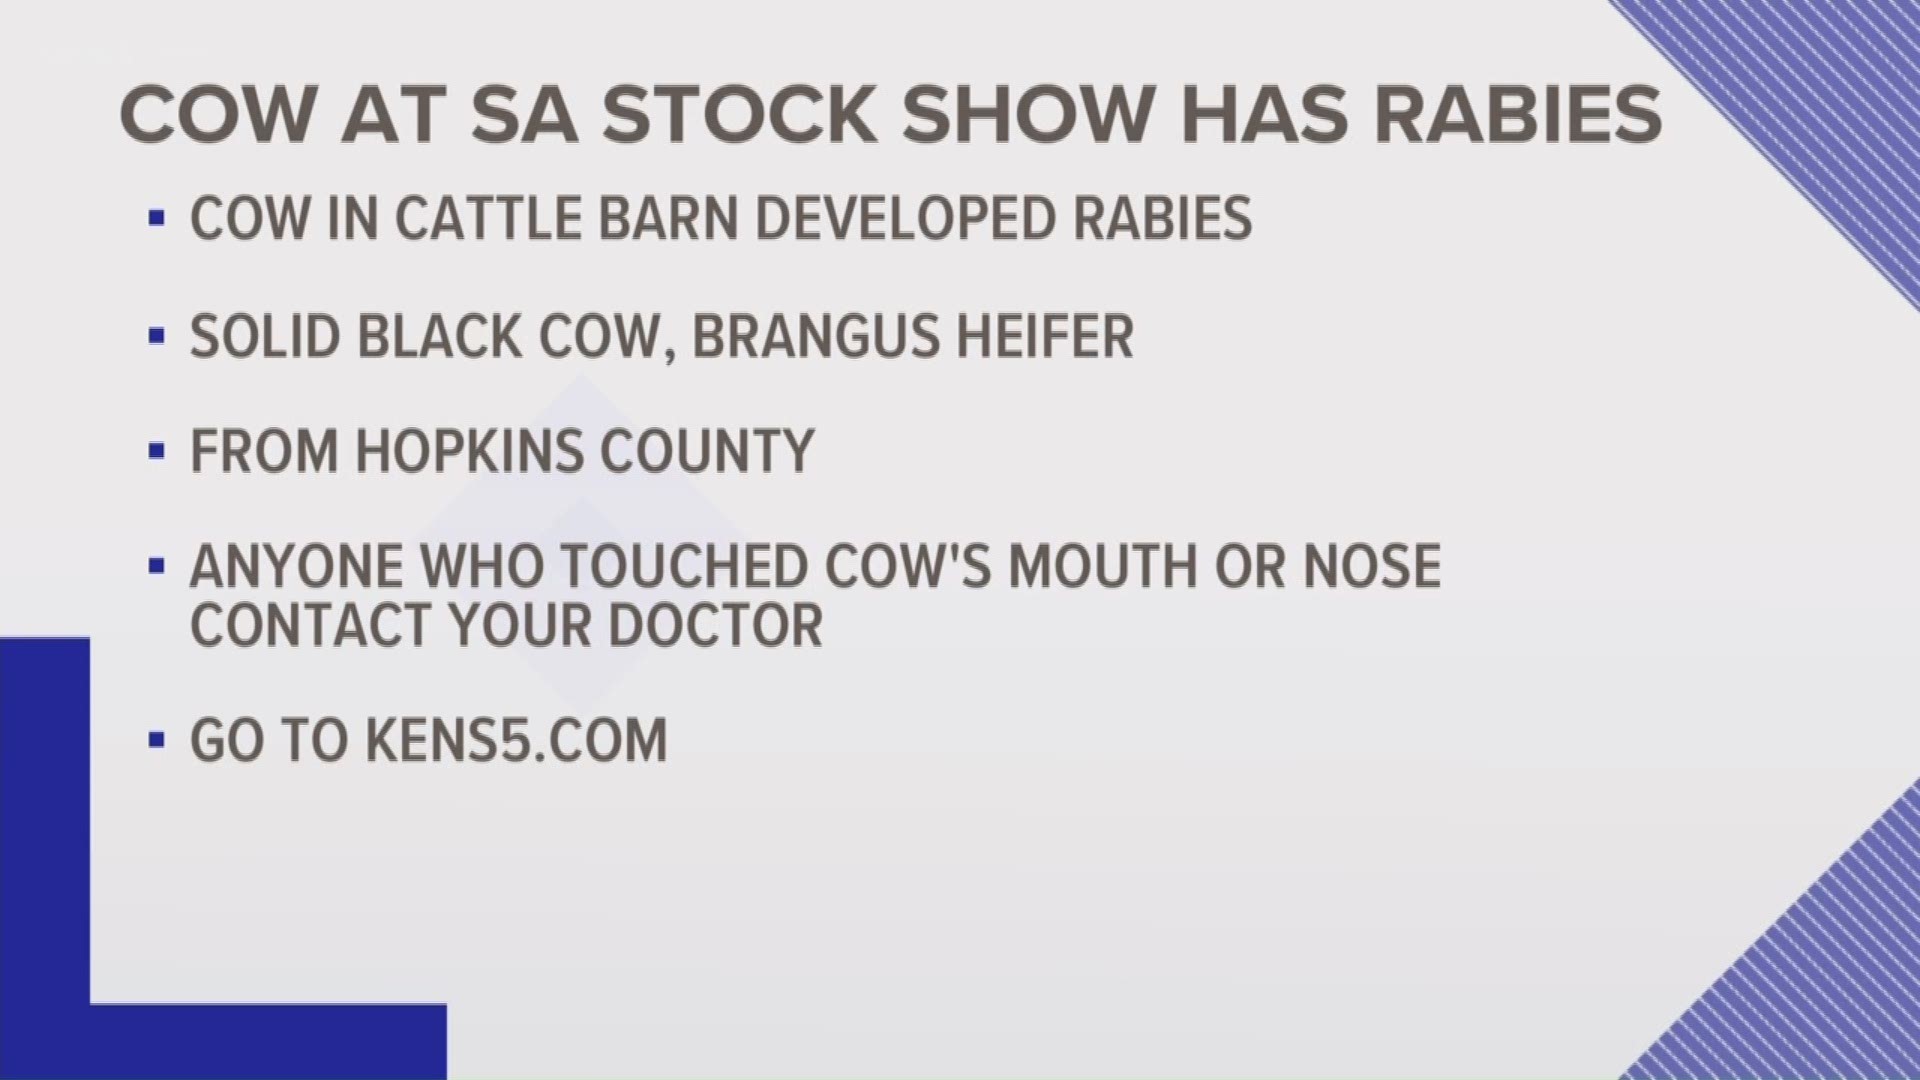 Officials said only rodeo attendees who came into contact with the cow's saliva are at risk for rabies exposure.